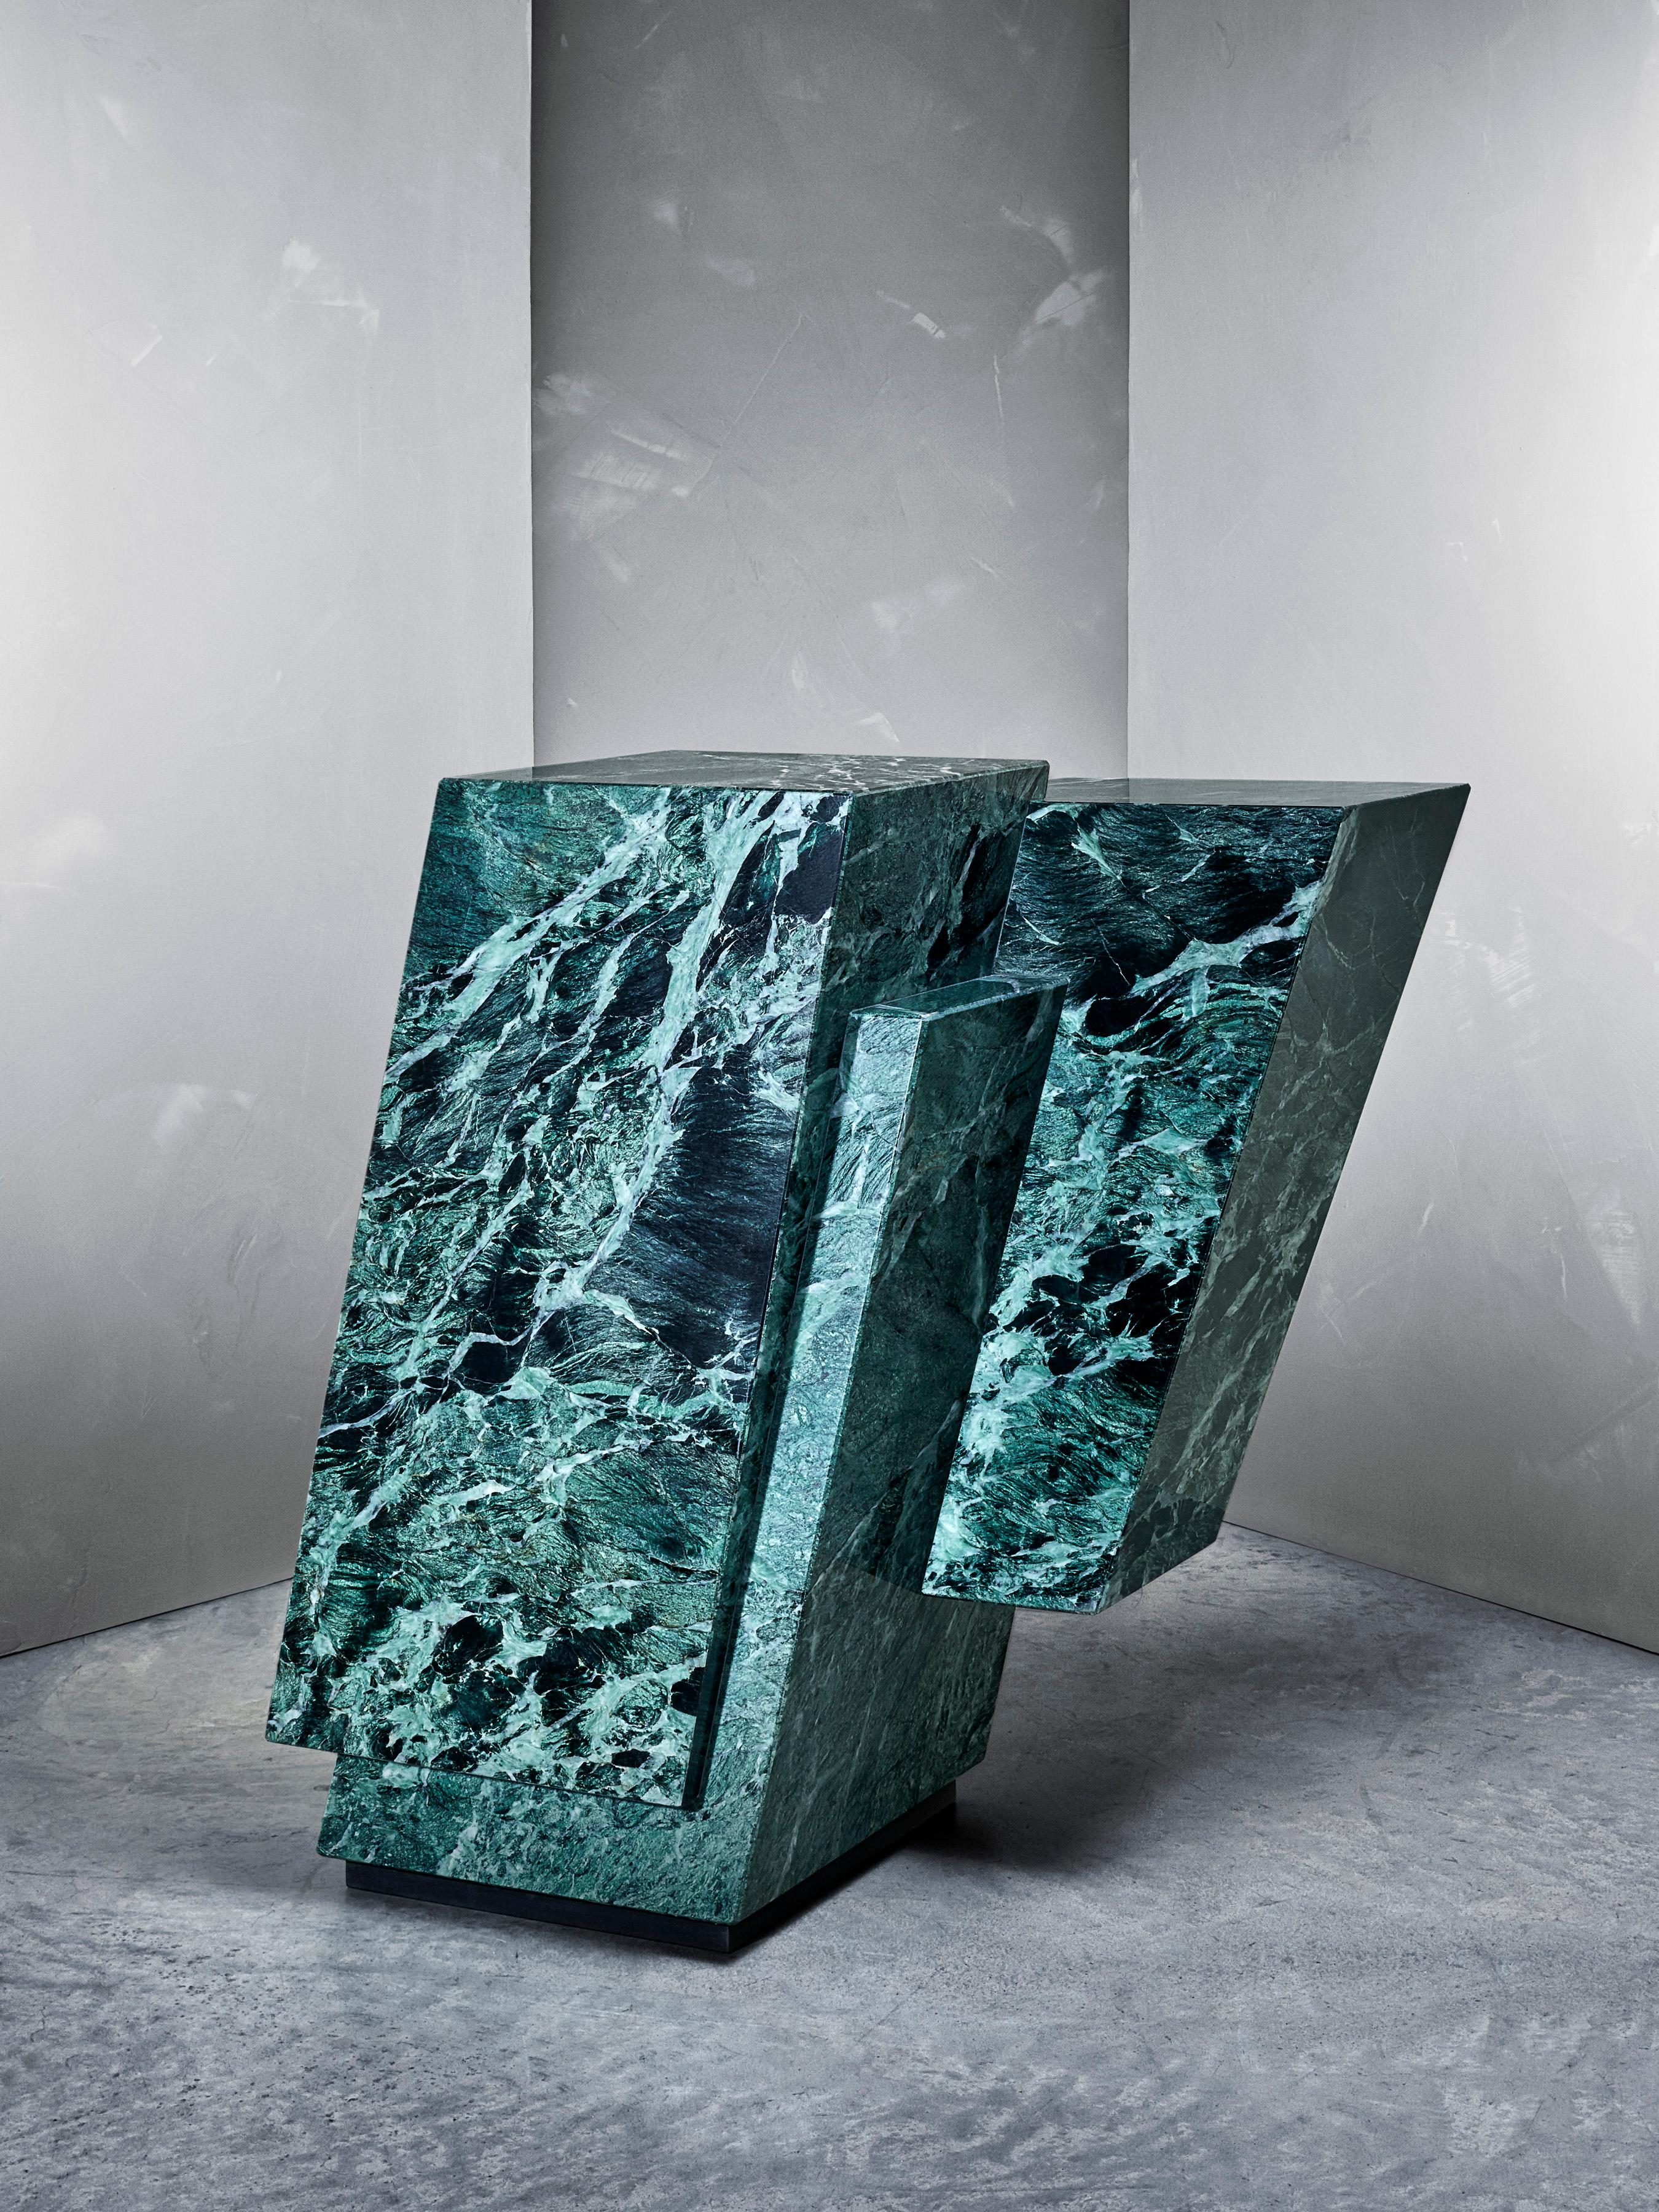 Convergence of crystal systems and species. Color and form. The cubic nature of pyrite and the depth of green dioptase are exemplified via the Verdi Alpi Side Table. This table so far has only been created once, this being the only example.

Antonio